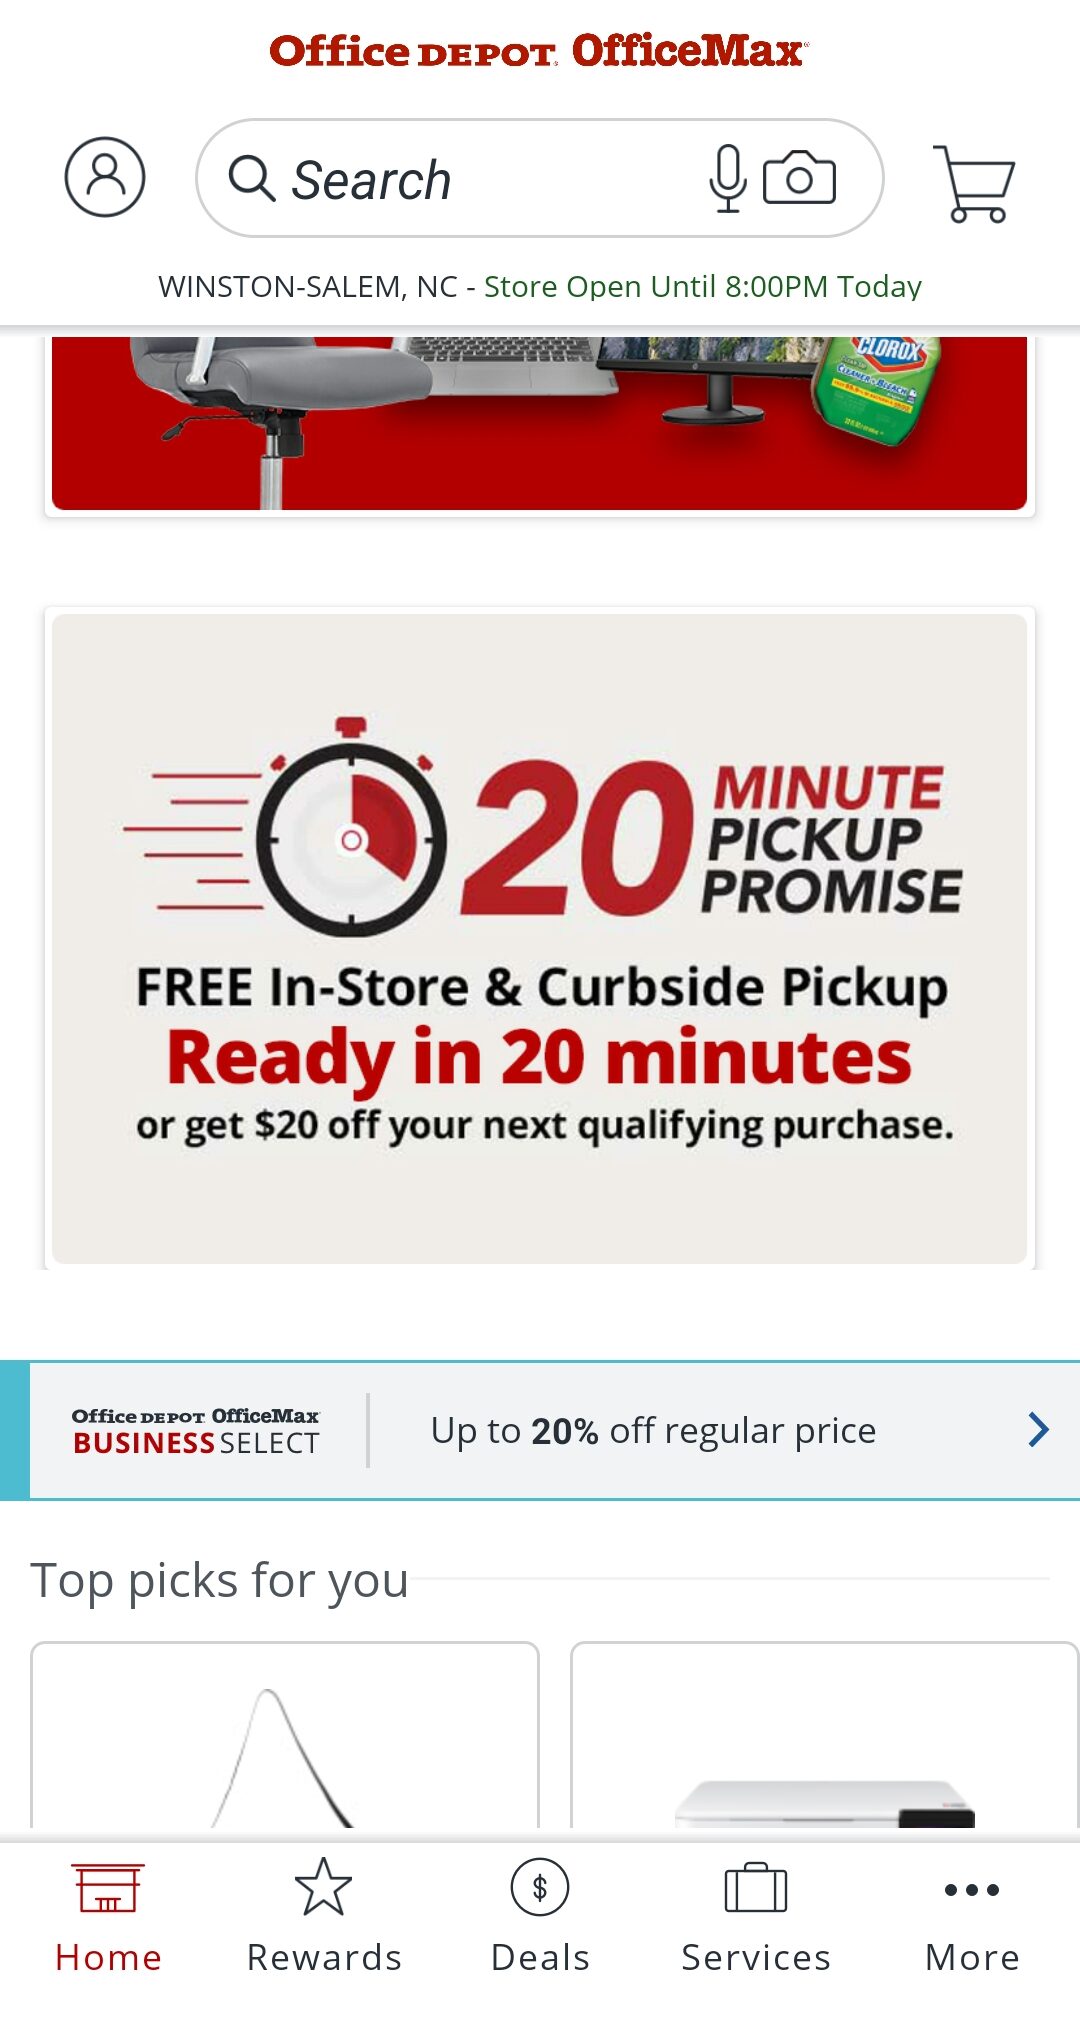 Office Depot meets its 20-minute pickup promise 98.9% of the time